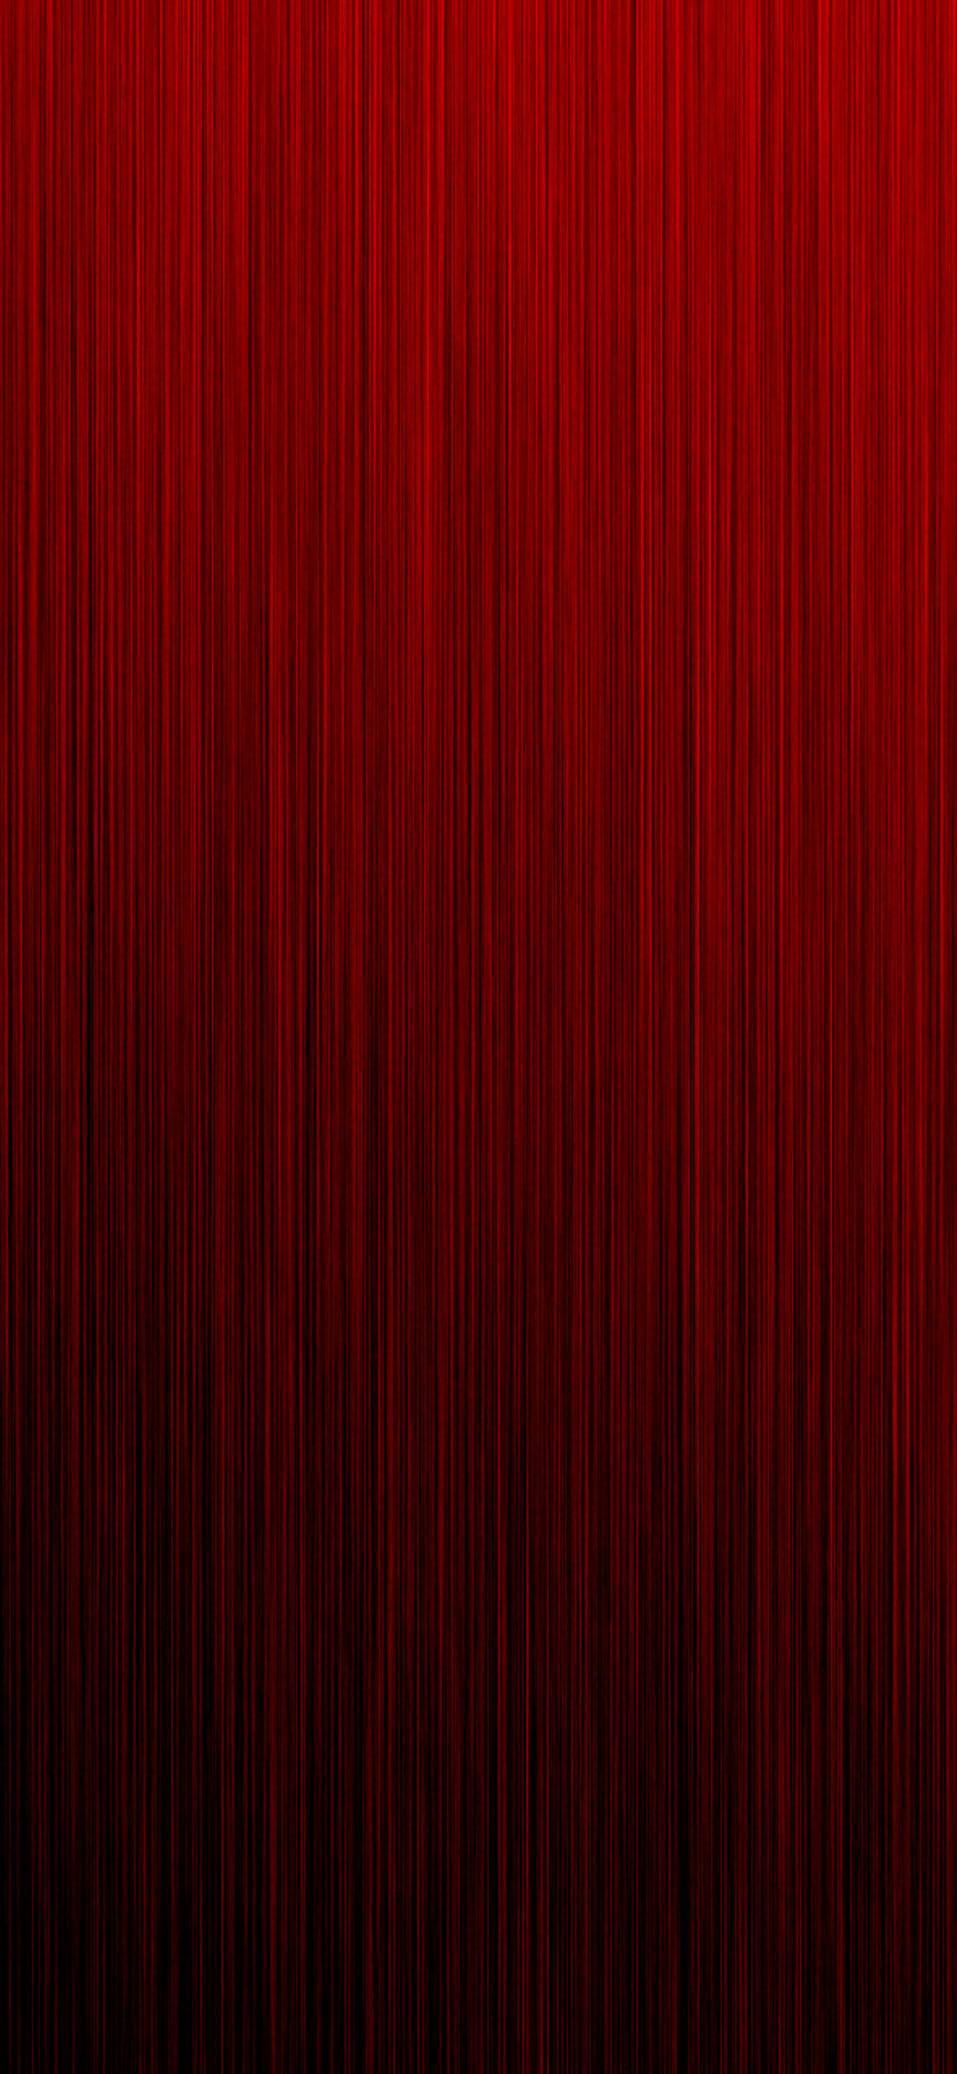 red background wallpaper hd s24 min 1